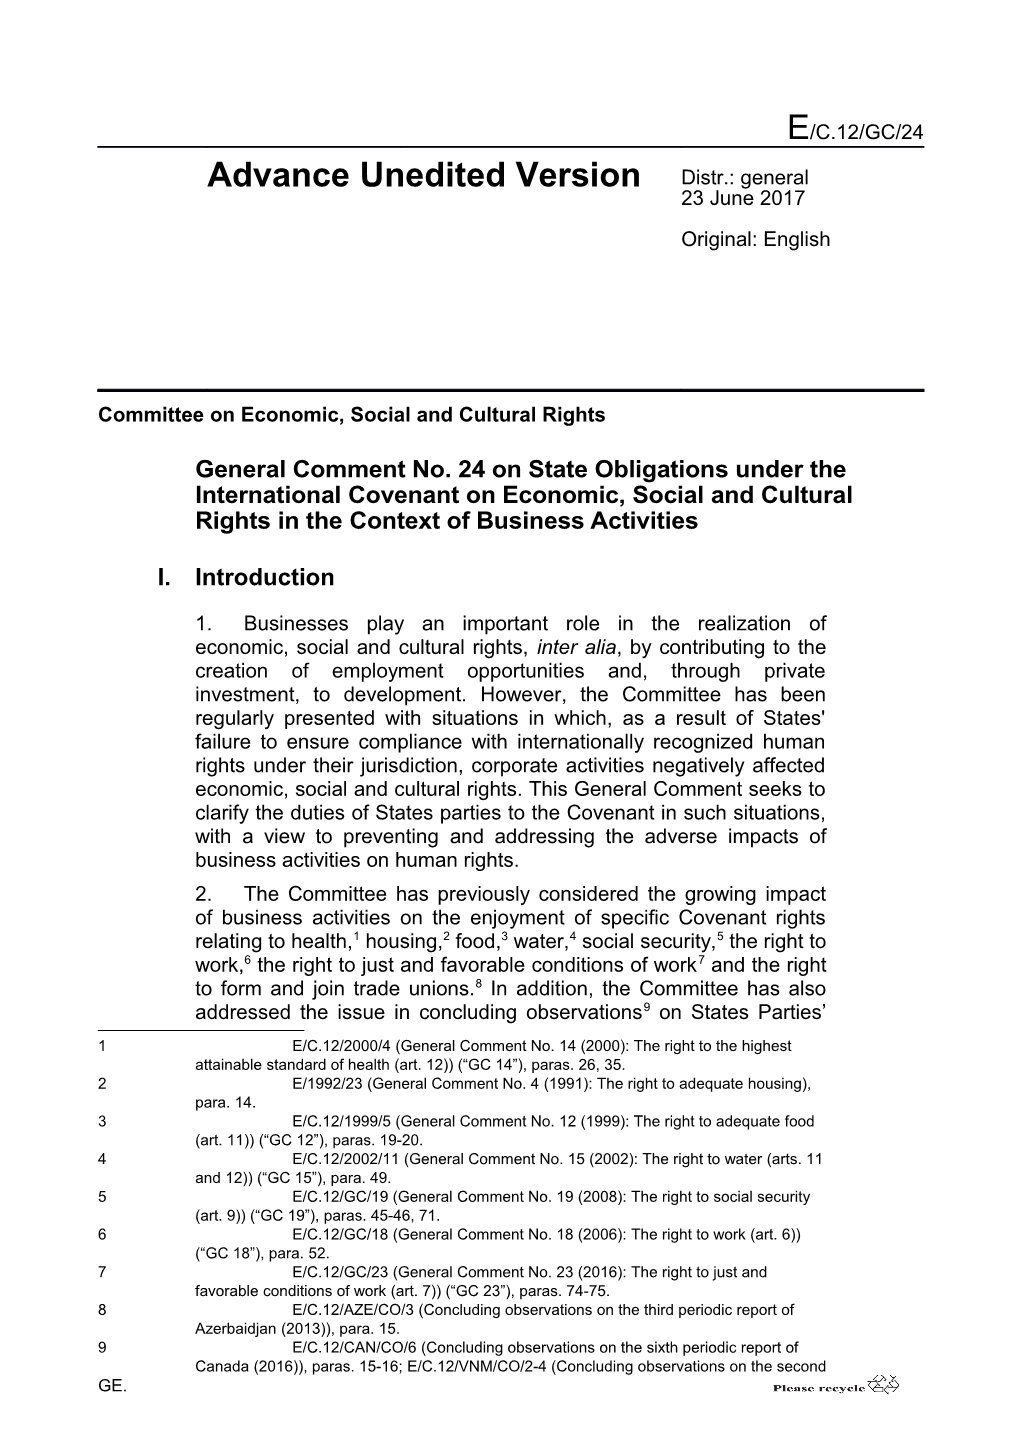 Committee on Economic, Social and Cultural Rights s9